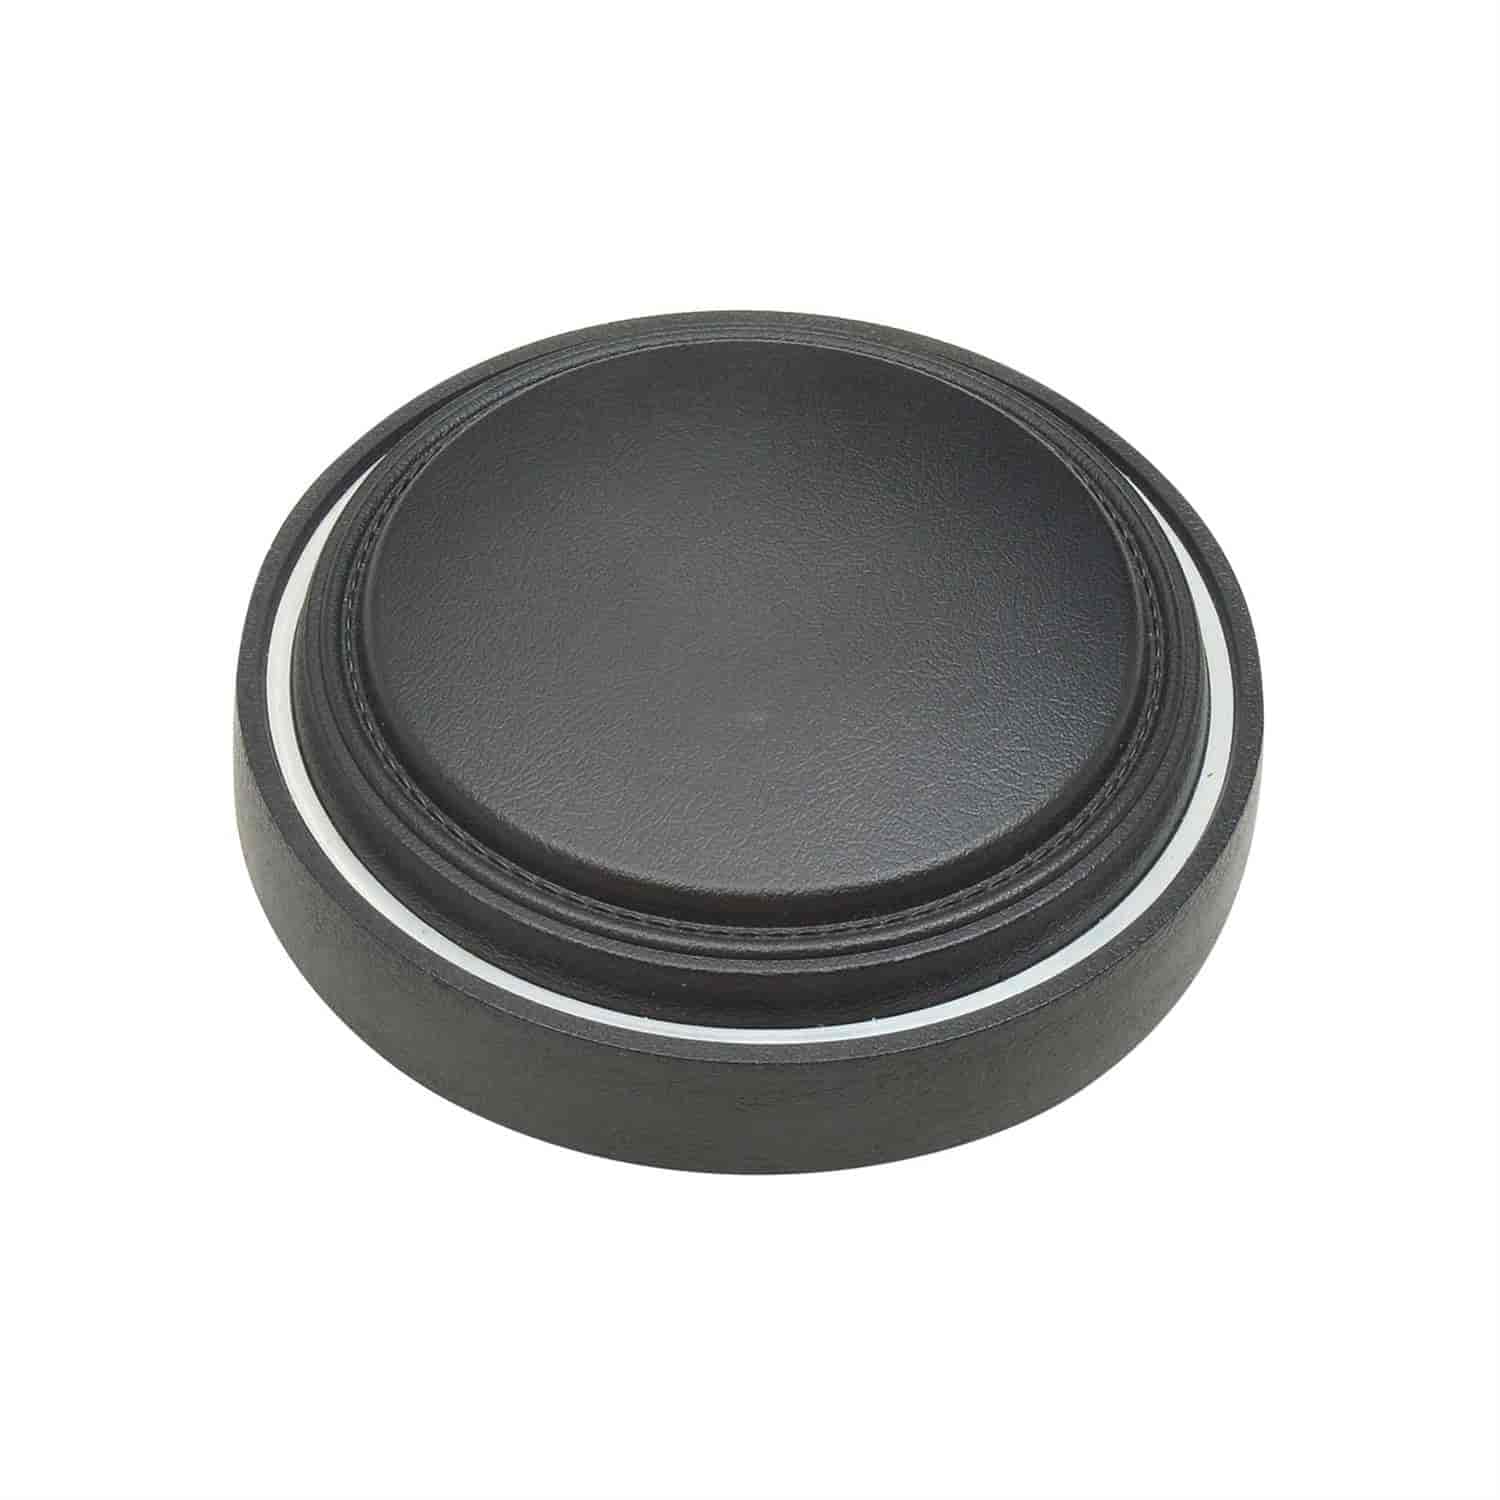 Tuff wheel Horn Button direct fit (OE-replacement) Black w/silver ring